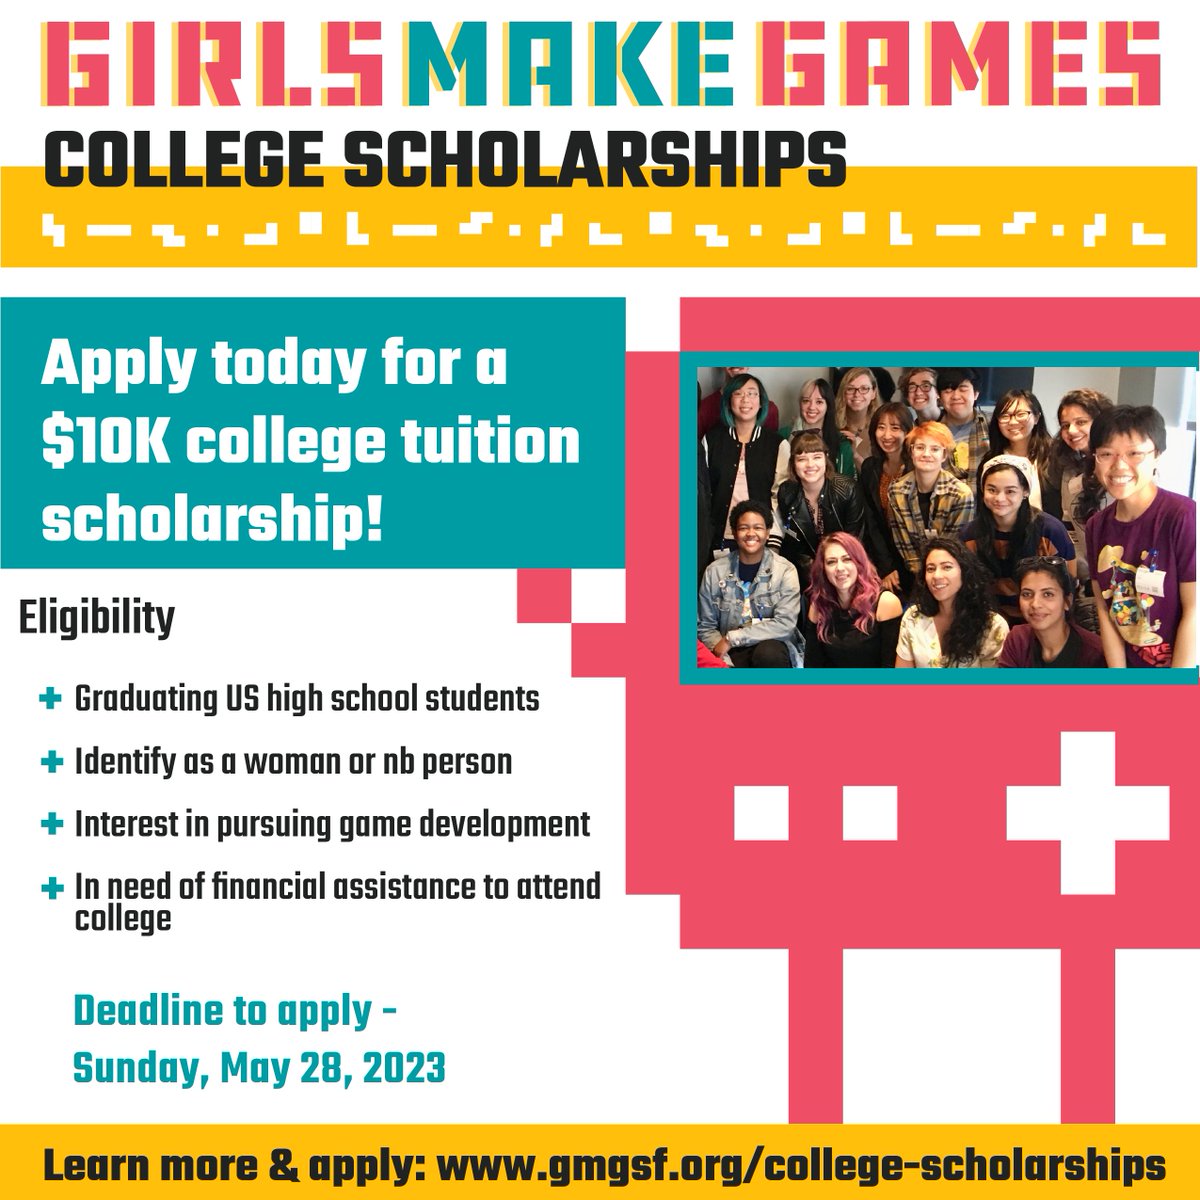 📢 Attention high school #seniors! The first ever @GirlsMakeGames Scholarship Fund College #Scholarship application is LIVE!

Apply now to receive a $10,000 grant, mentorship, and internship/job placement support for up to four years! 

Apply by May 28th! bit.ly/gmgsf-college